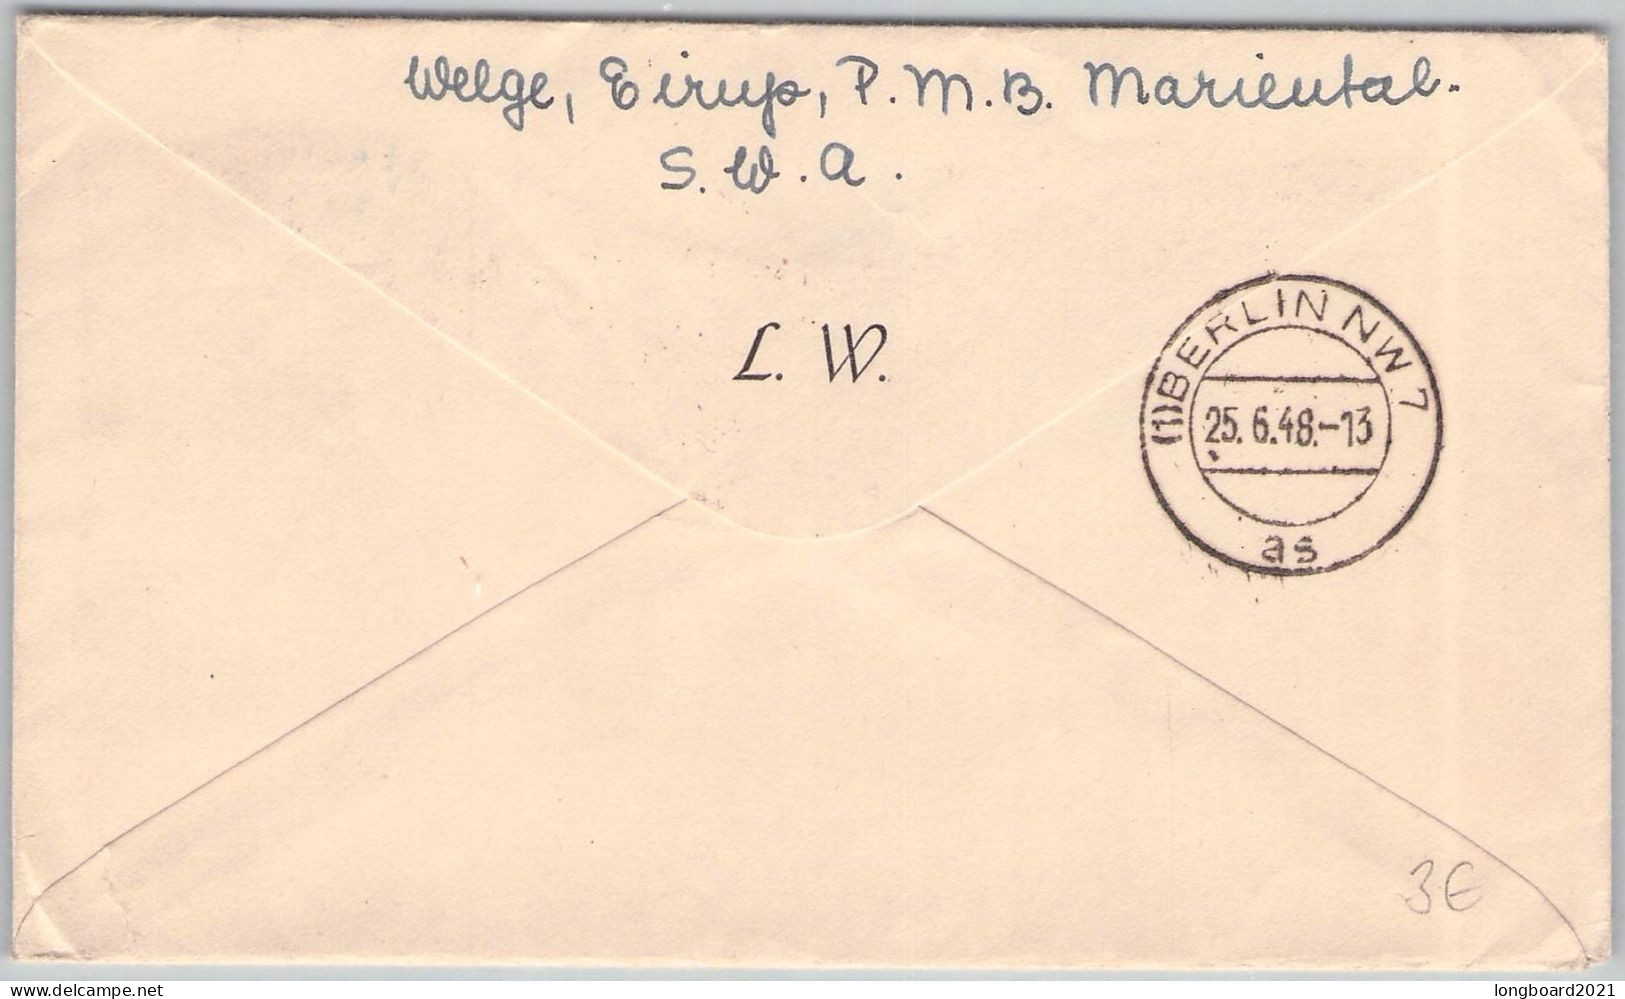 SOUTH WEST AFRICA - AIRMAIL 1948 MARIENTAL - GÜSTROW/DE / 6322 - Africa Del Sud-Ovest (1923-1990)